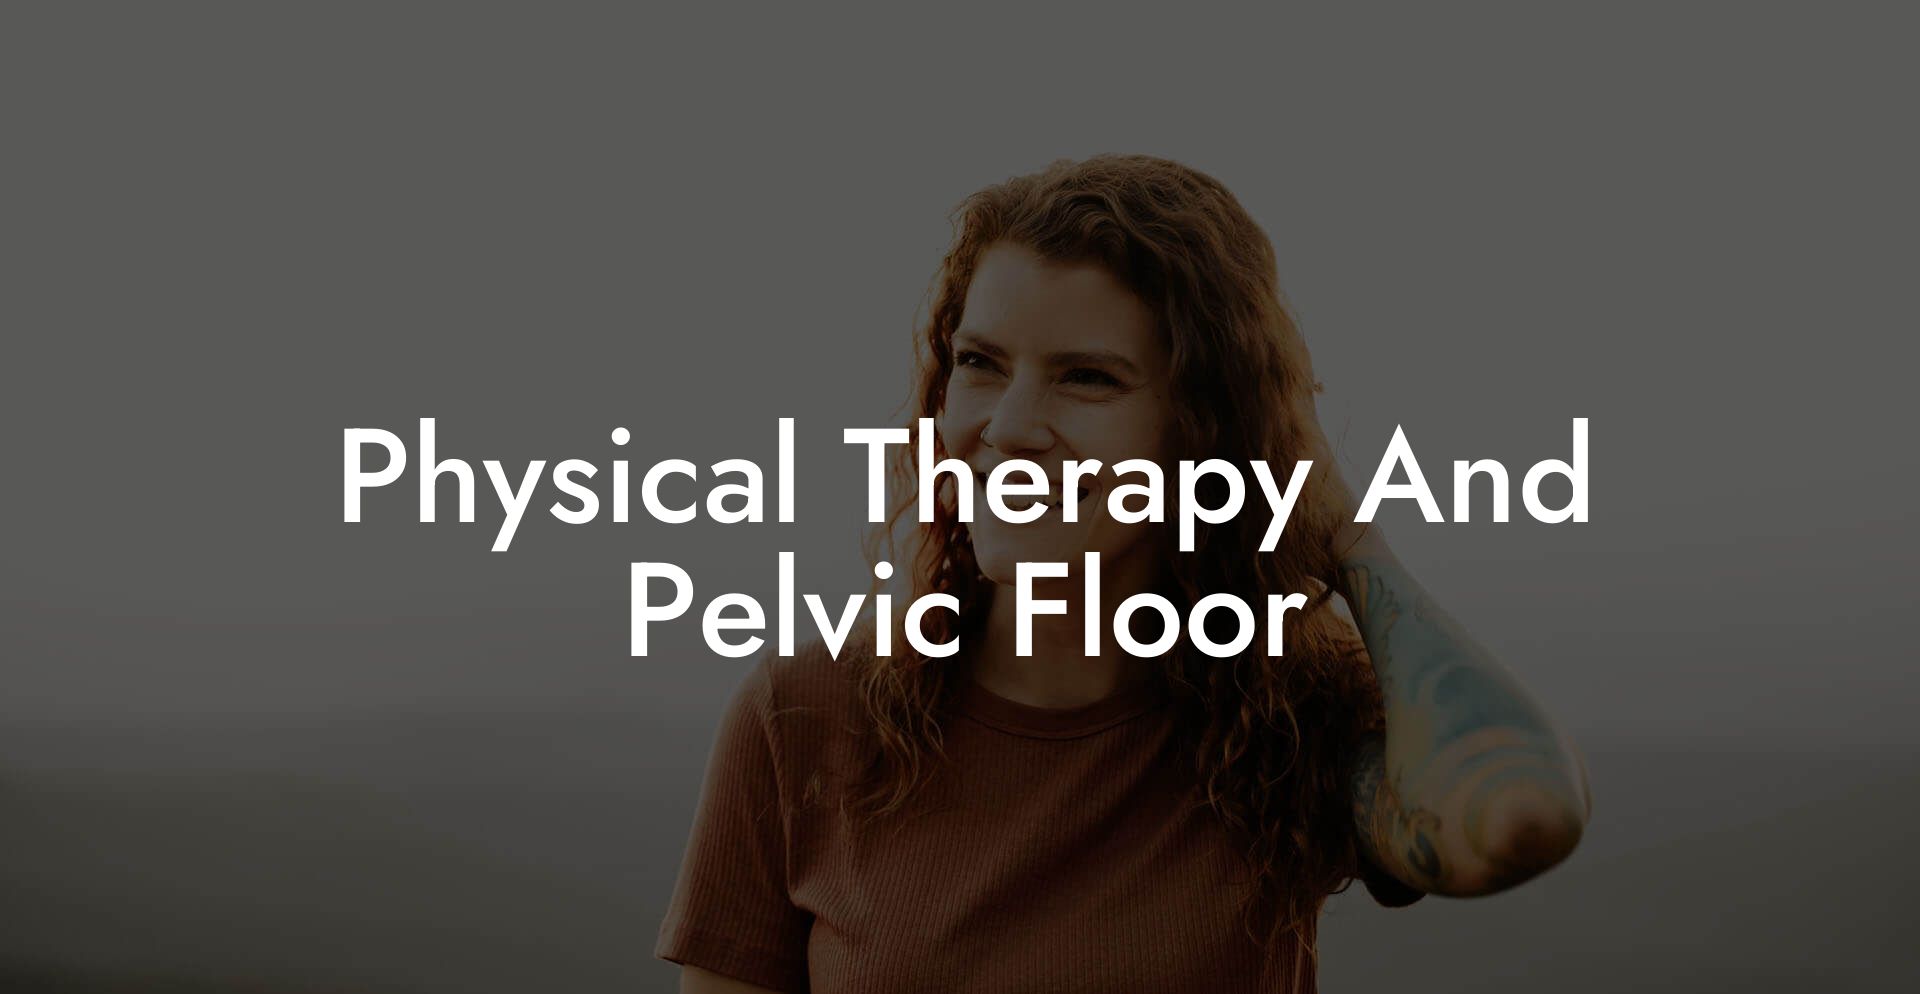 Physical Therapy And Pelvic Floor